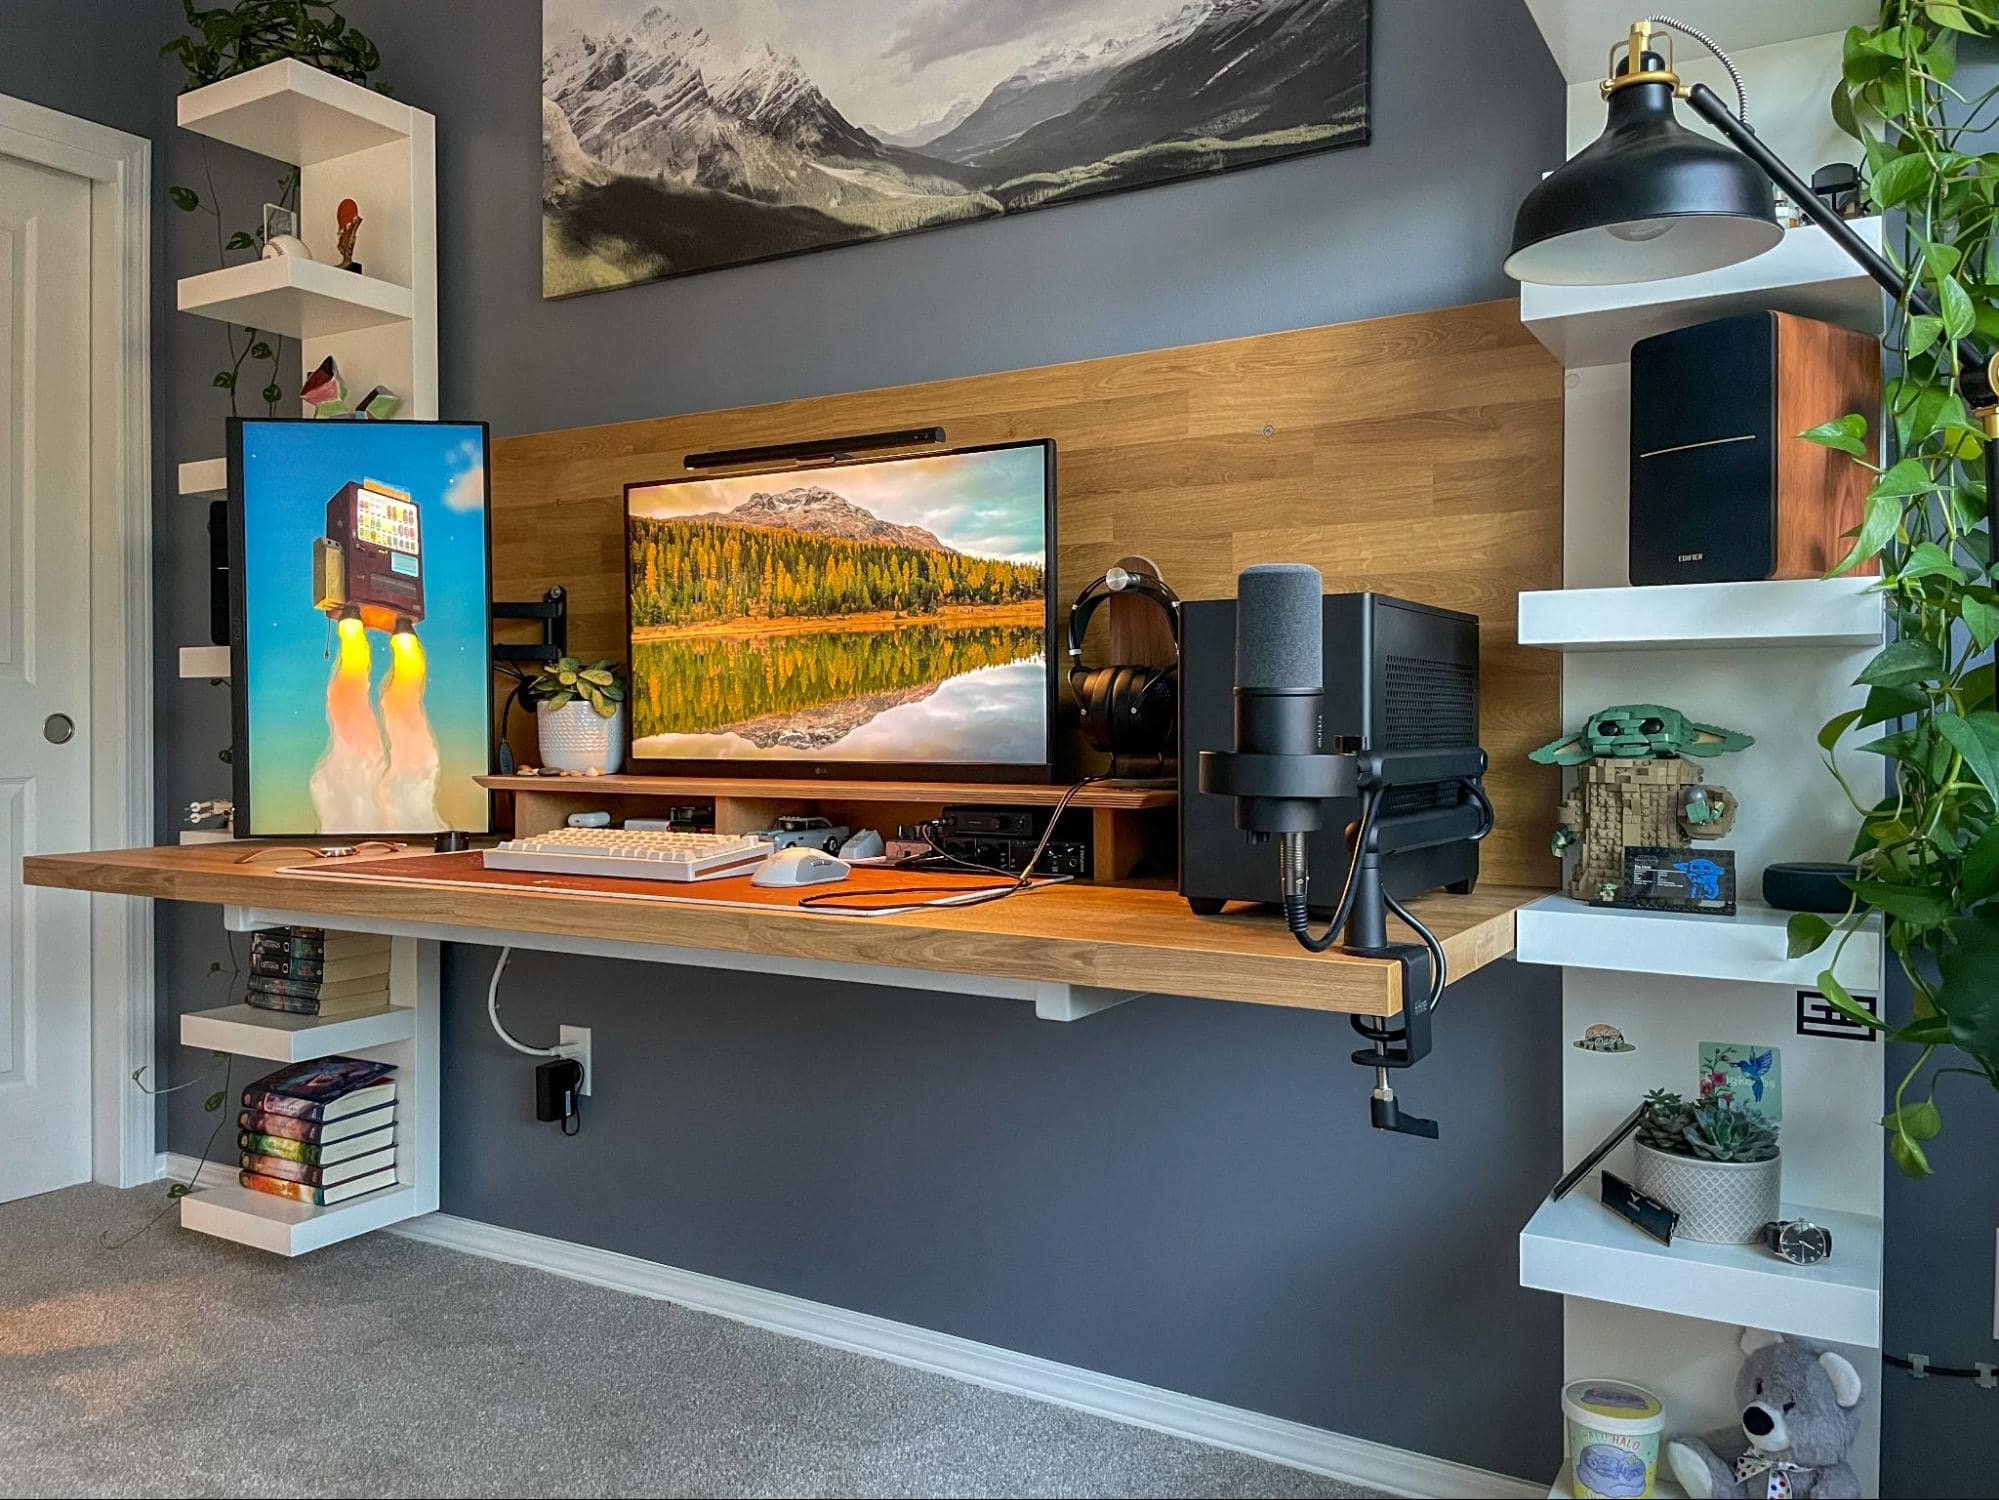 A well-organised home office with a floating wooden desk, dual monitors, a microphone, speakers, and decorative shelves with plants and toys, set against a grey wall with landscape paintings